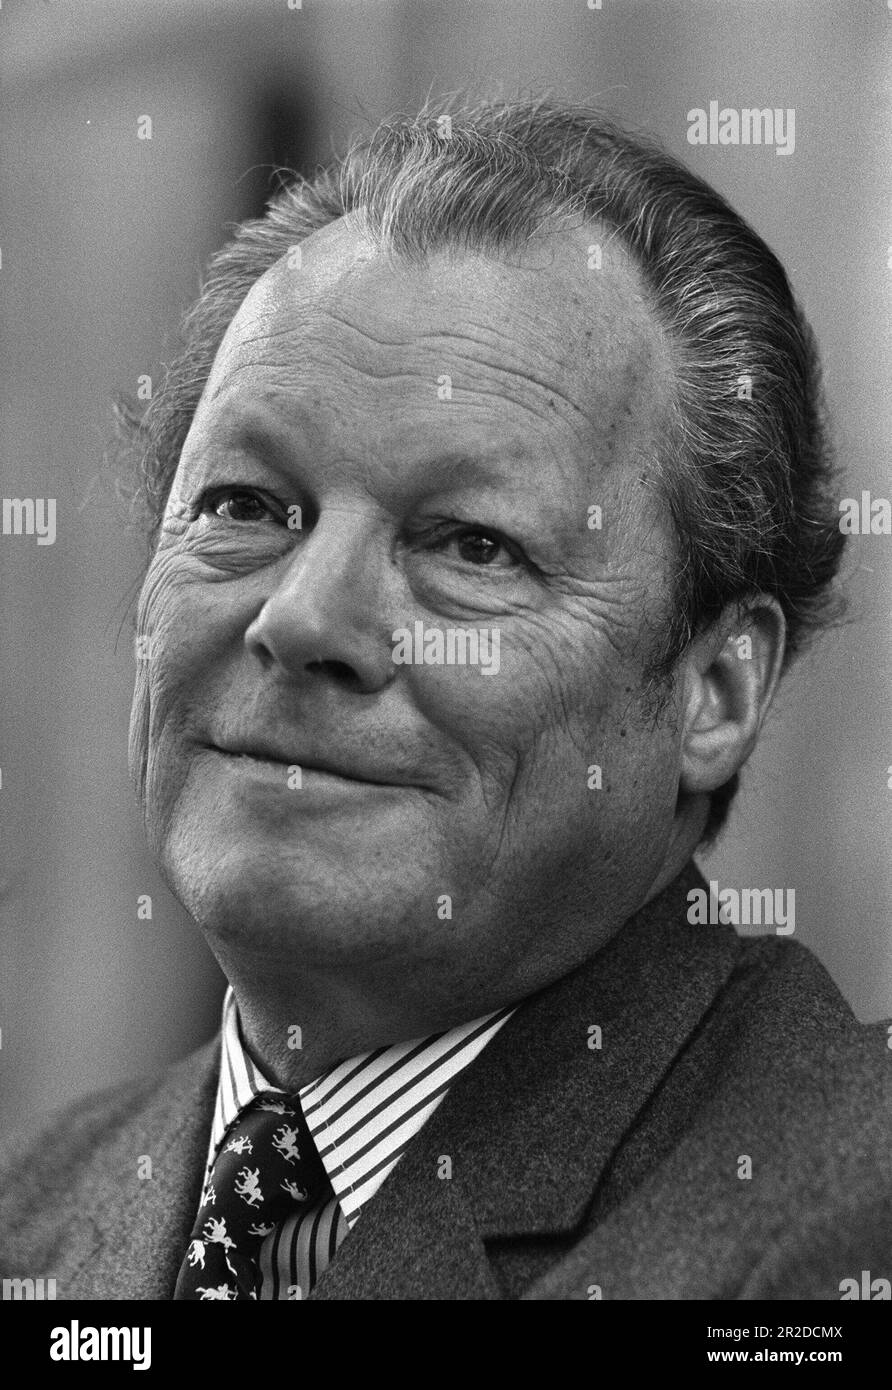 ARCHIVE PHOTO: The SPD will be 160 years old on May 23, 2023, Willy BRANDT, Germany, politician, SPD, Federal Chancellor, portrait, portrait, vertical format, slightly to the side, mild, gently smiling, smile, black and white photo, November 16, 1973. 10/09/2007. ?SVEN SIMON#Prinzess-Luise-Strasse 41#45479 Muelheim/R uhr #tel. 0208/9413250#fax. 0208/9413260# Postgiro Essen No. 244 293 433 (BLZ 360 100 43)# www.SvenSimon.net. Stock Photo